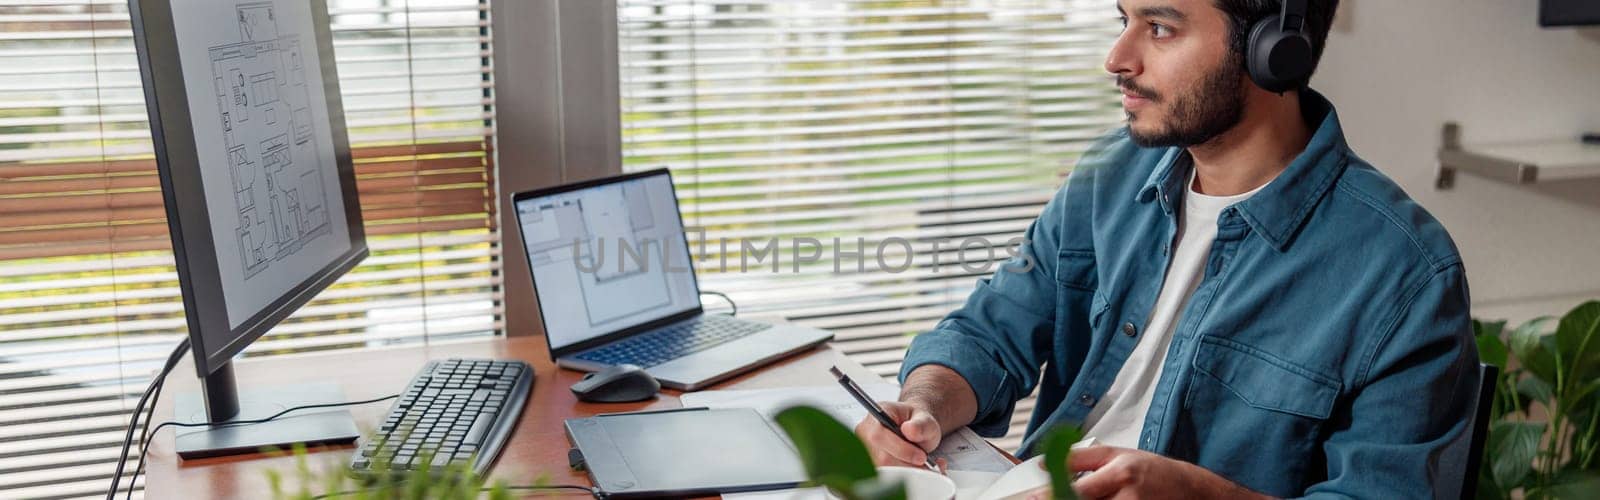 Focused man interior designer in headphones works in home office. High quality photo